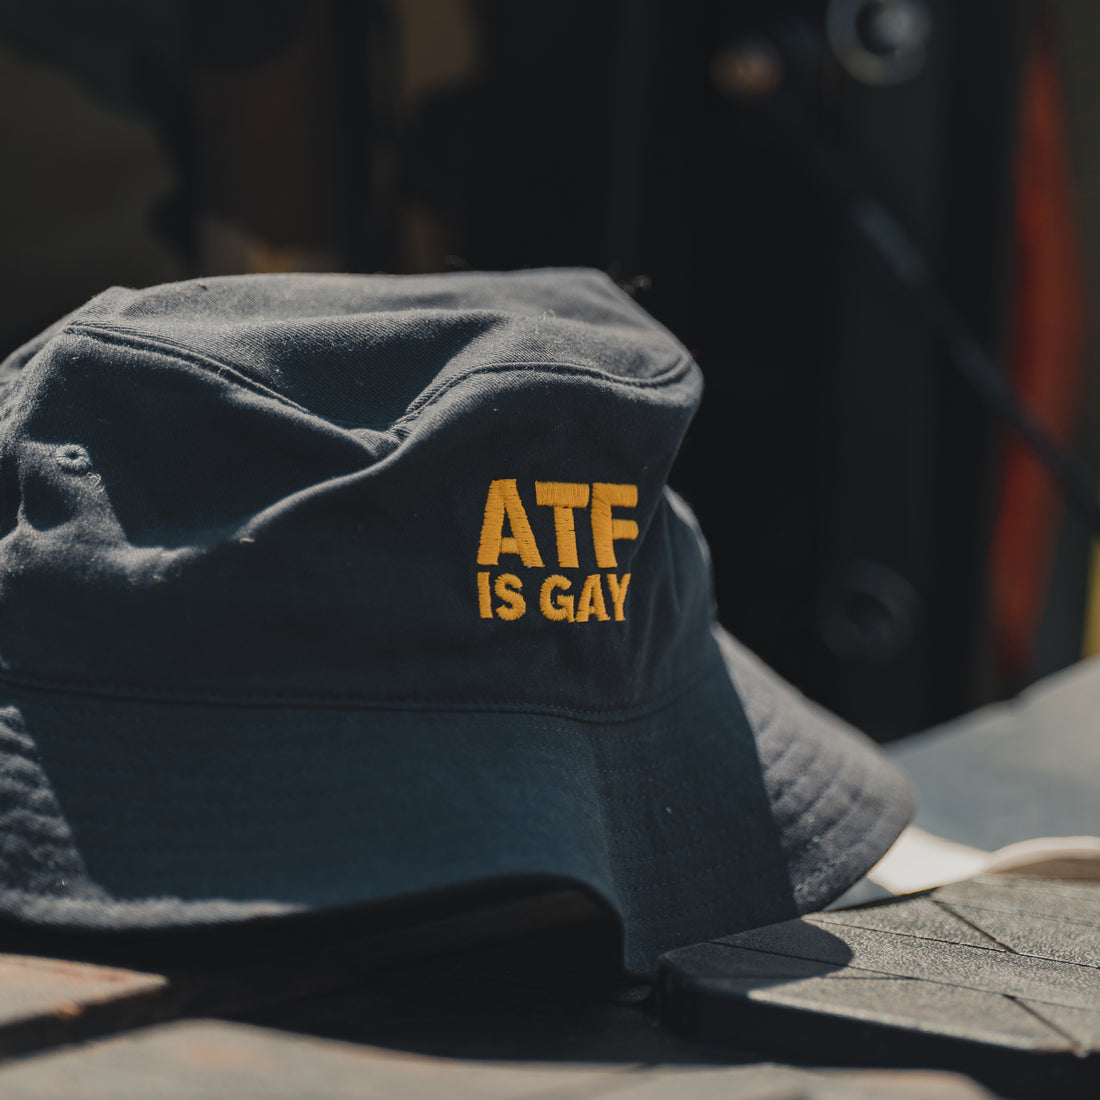 ATF IS GAY